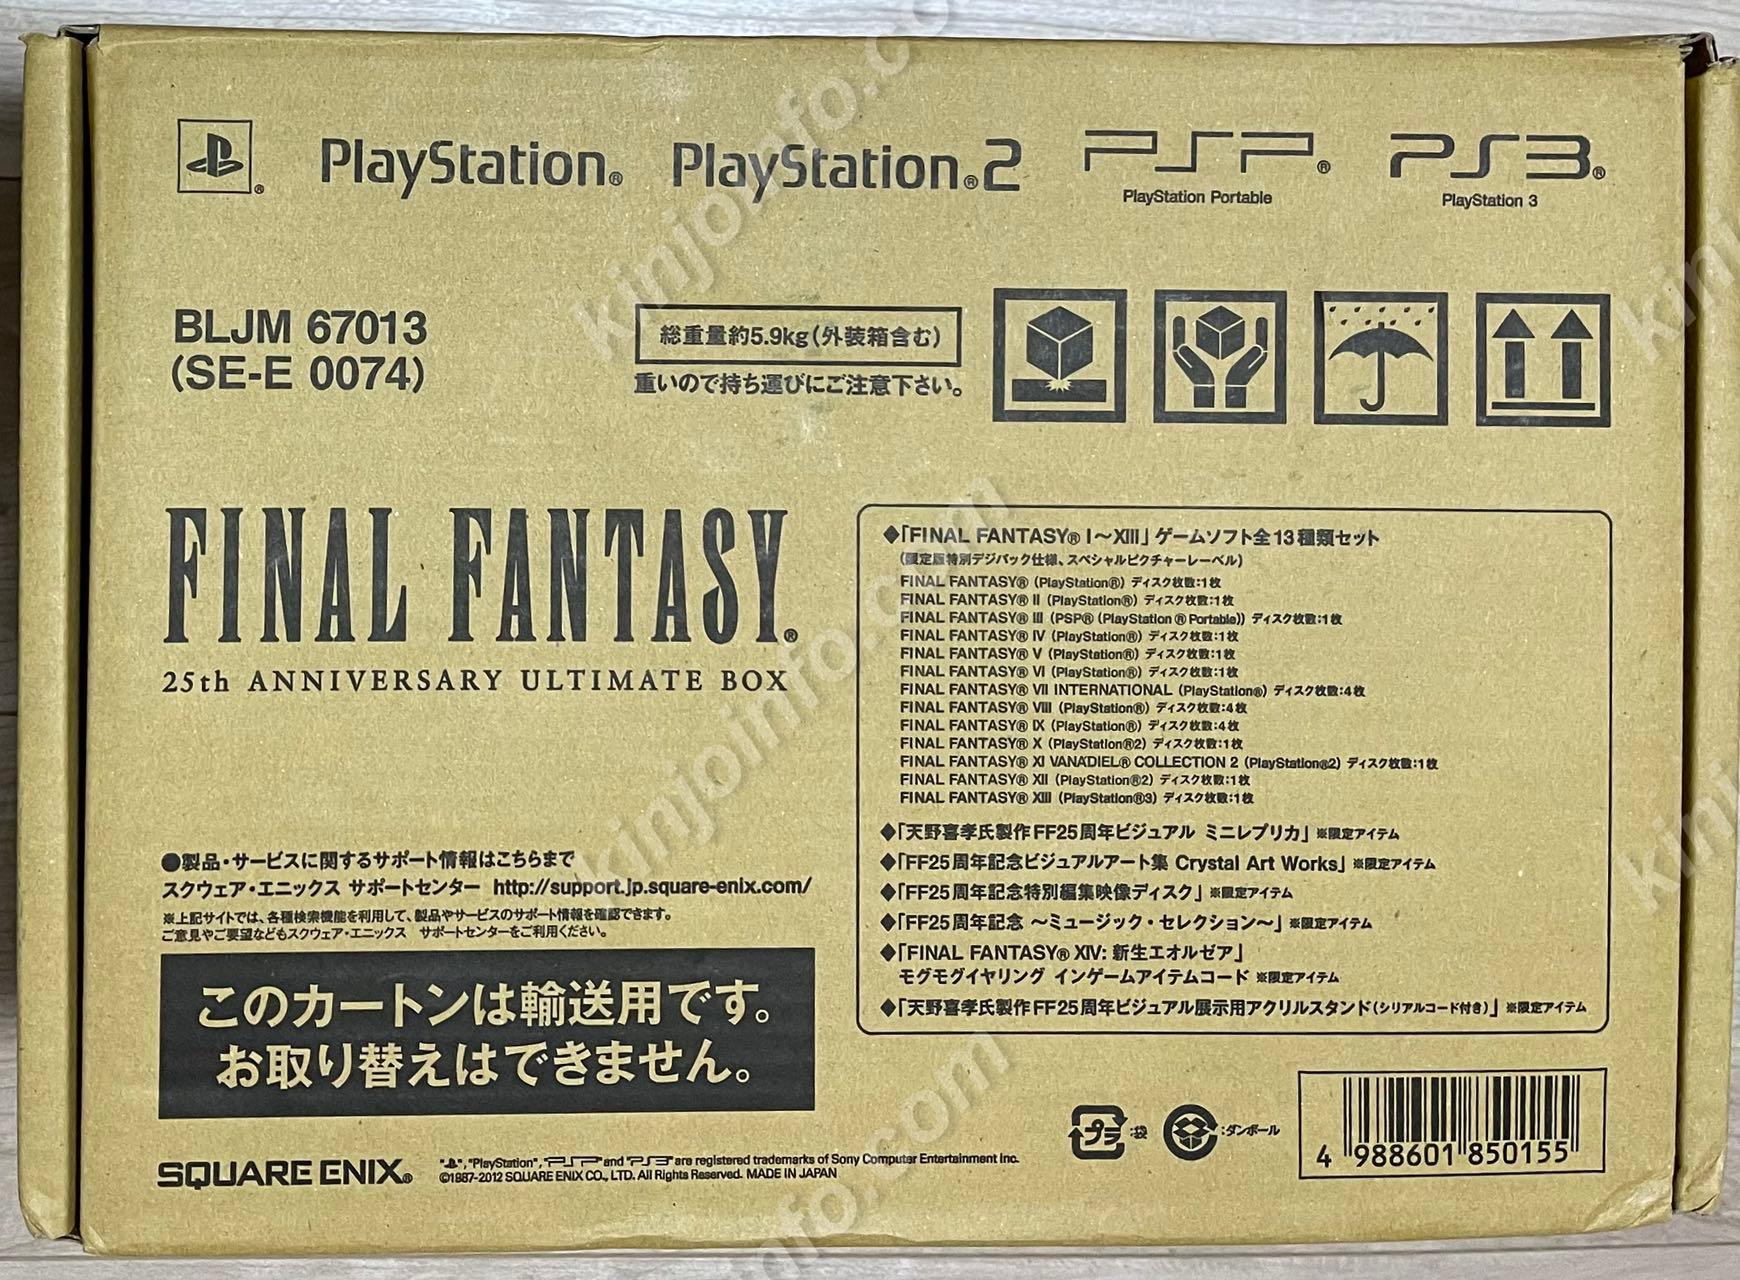 FINAL FANTASY 25th ANNIVERSARY ULTIMATE BOX【新品未使用・PS・PS2・PSP・PS3日本版】